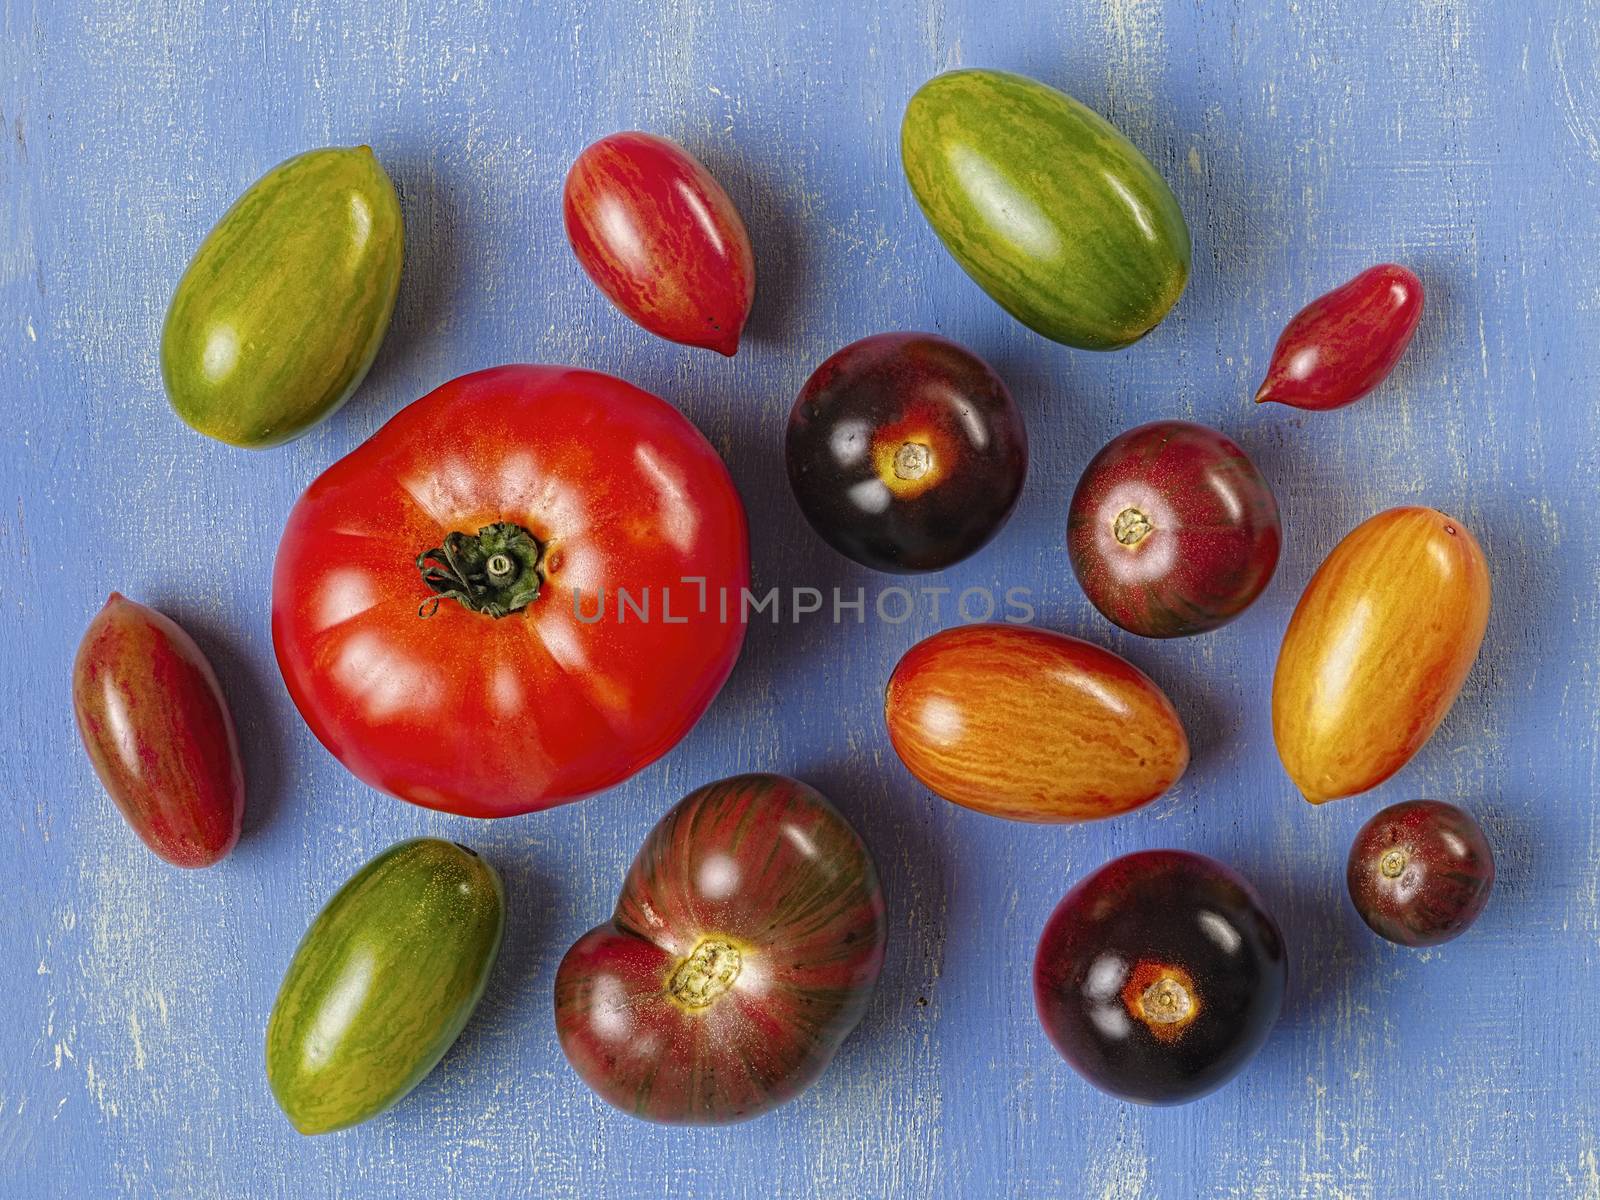 rustic heirloom tomato by zkruger